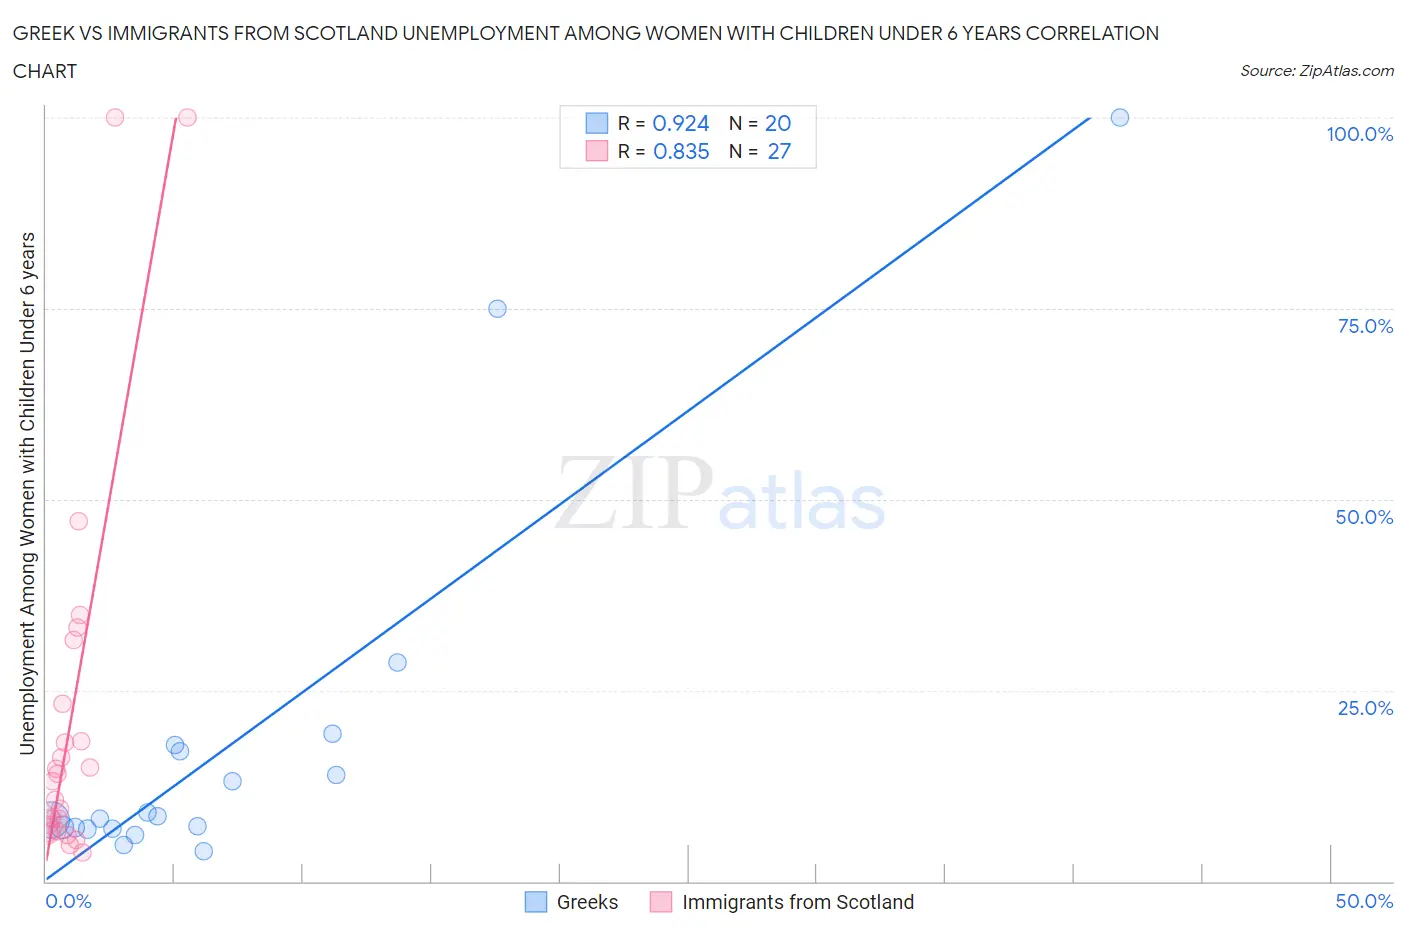 Greek vs Immigrants from Scotland Unemployment Among Women with Children Under 6 years